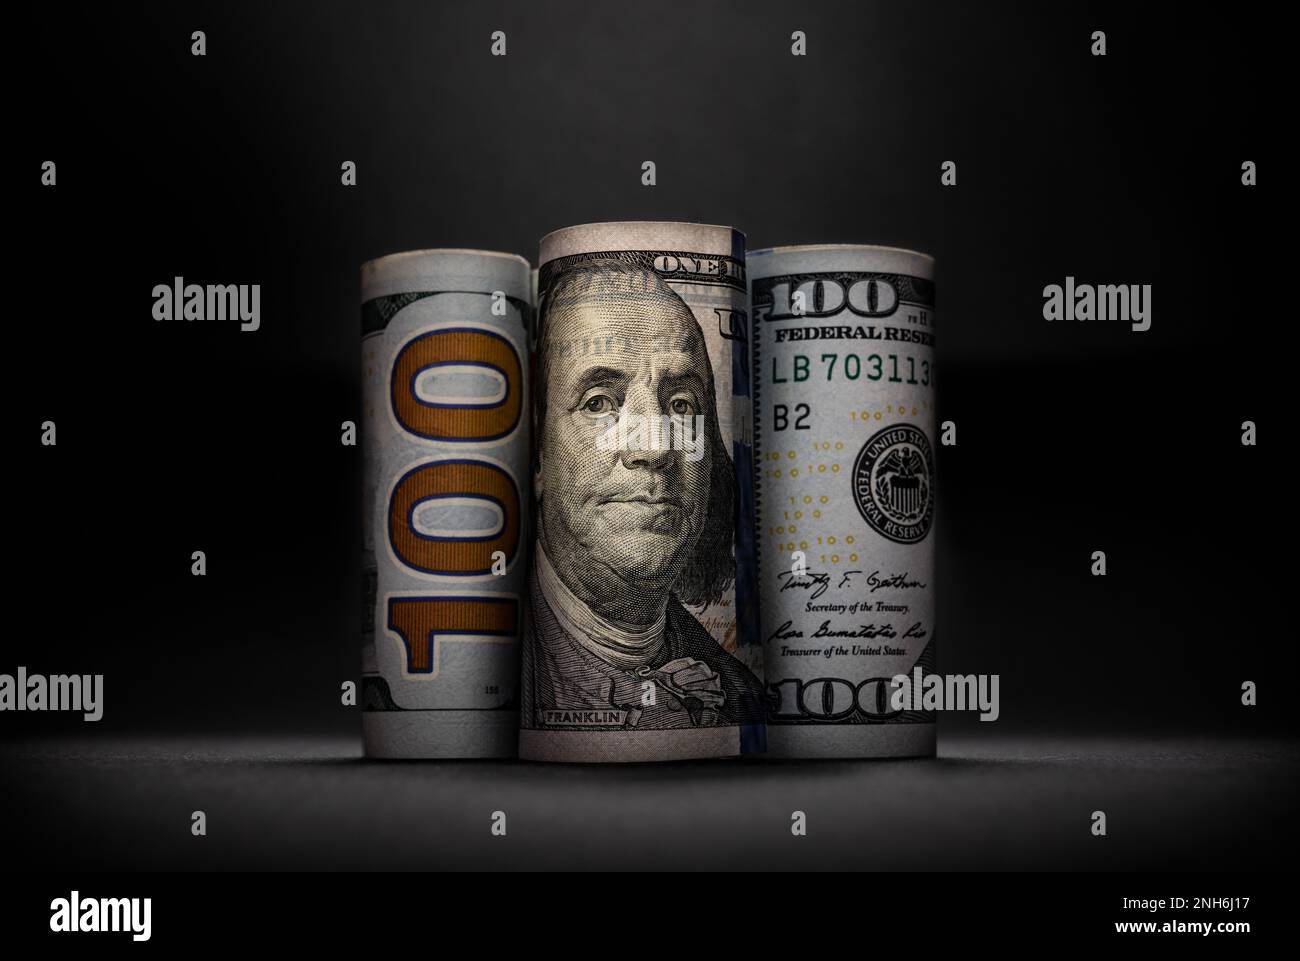 Three different images of 100 US dollars in rolls on dark background Stock Photo